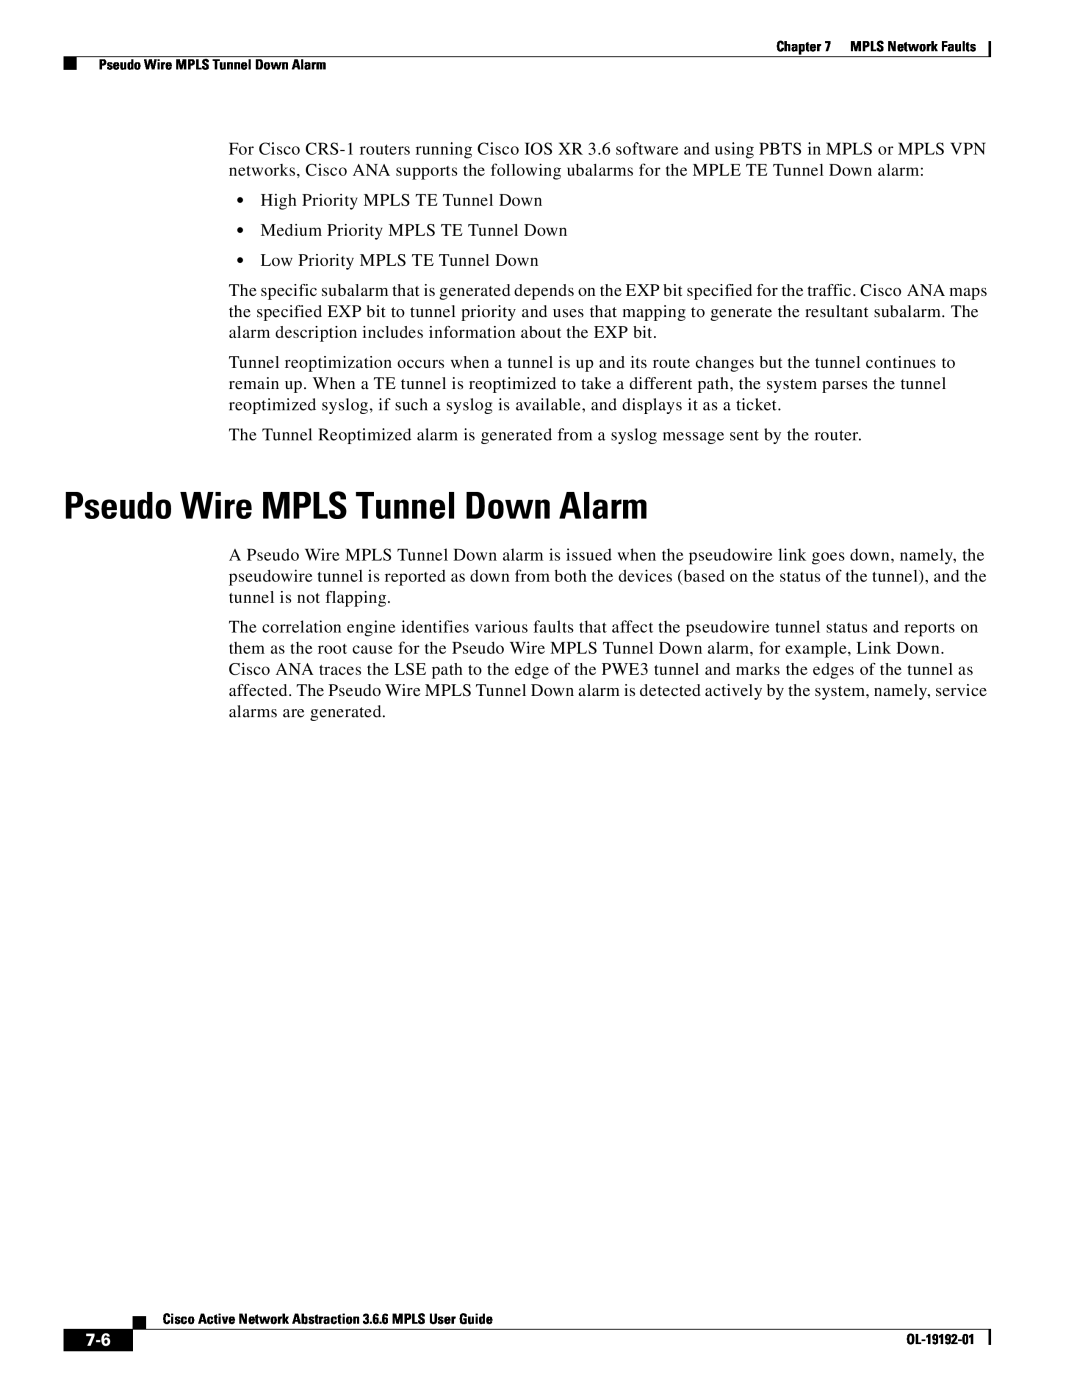 Cisco Systems 3.6.6 manual Pseudo Wire MPLS Tunnel Down Alarm 